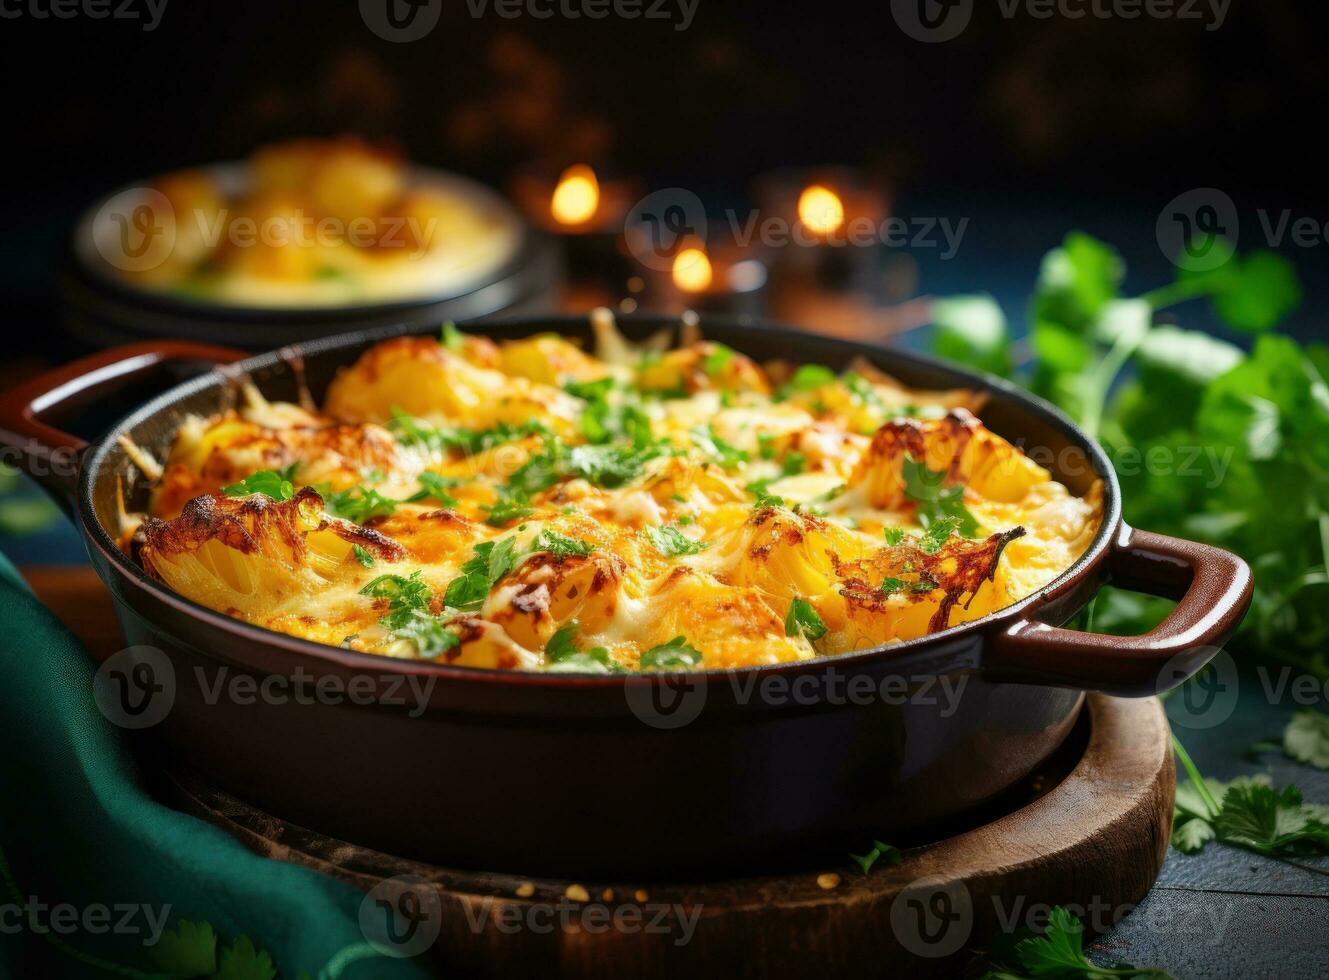 Cooked cauliflower in the casserole photo